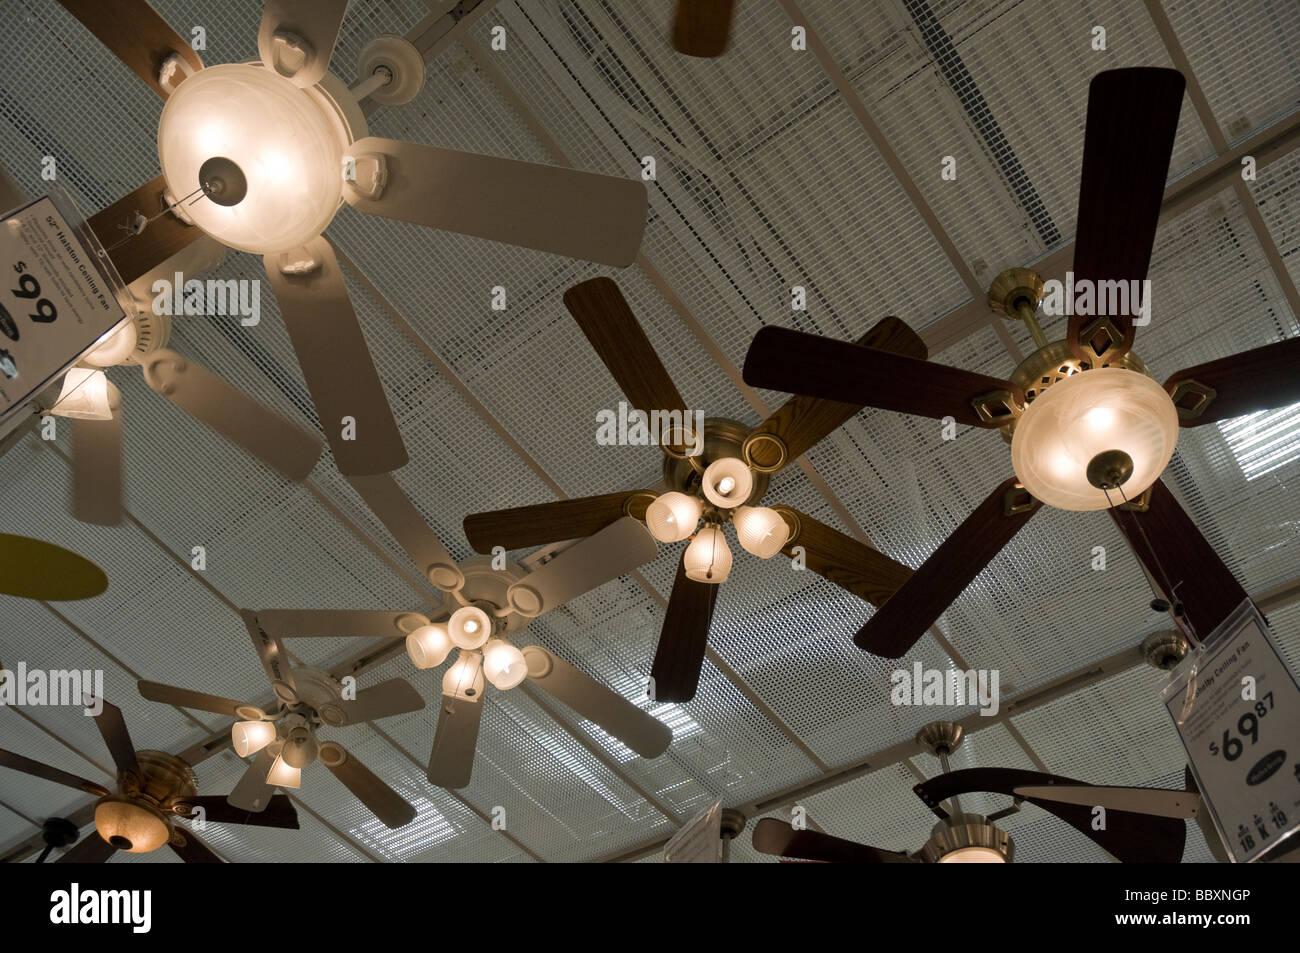 Ceiling Fans And Lights Hanging From Ceiling Of Lowe S Home Stock